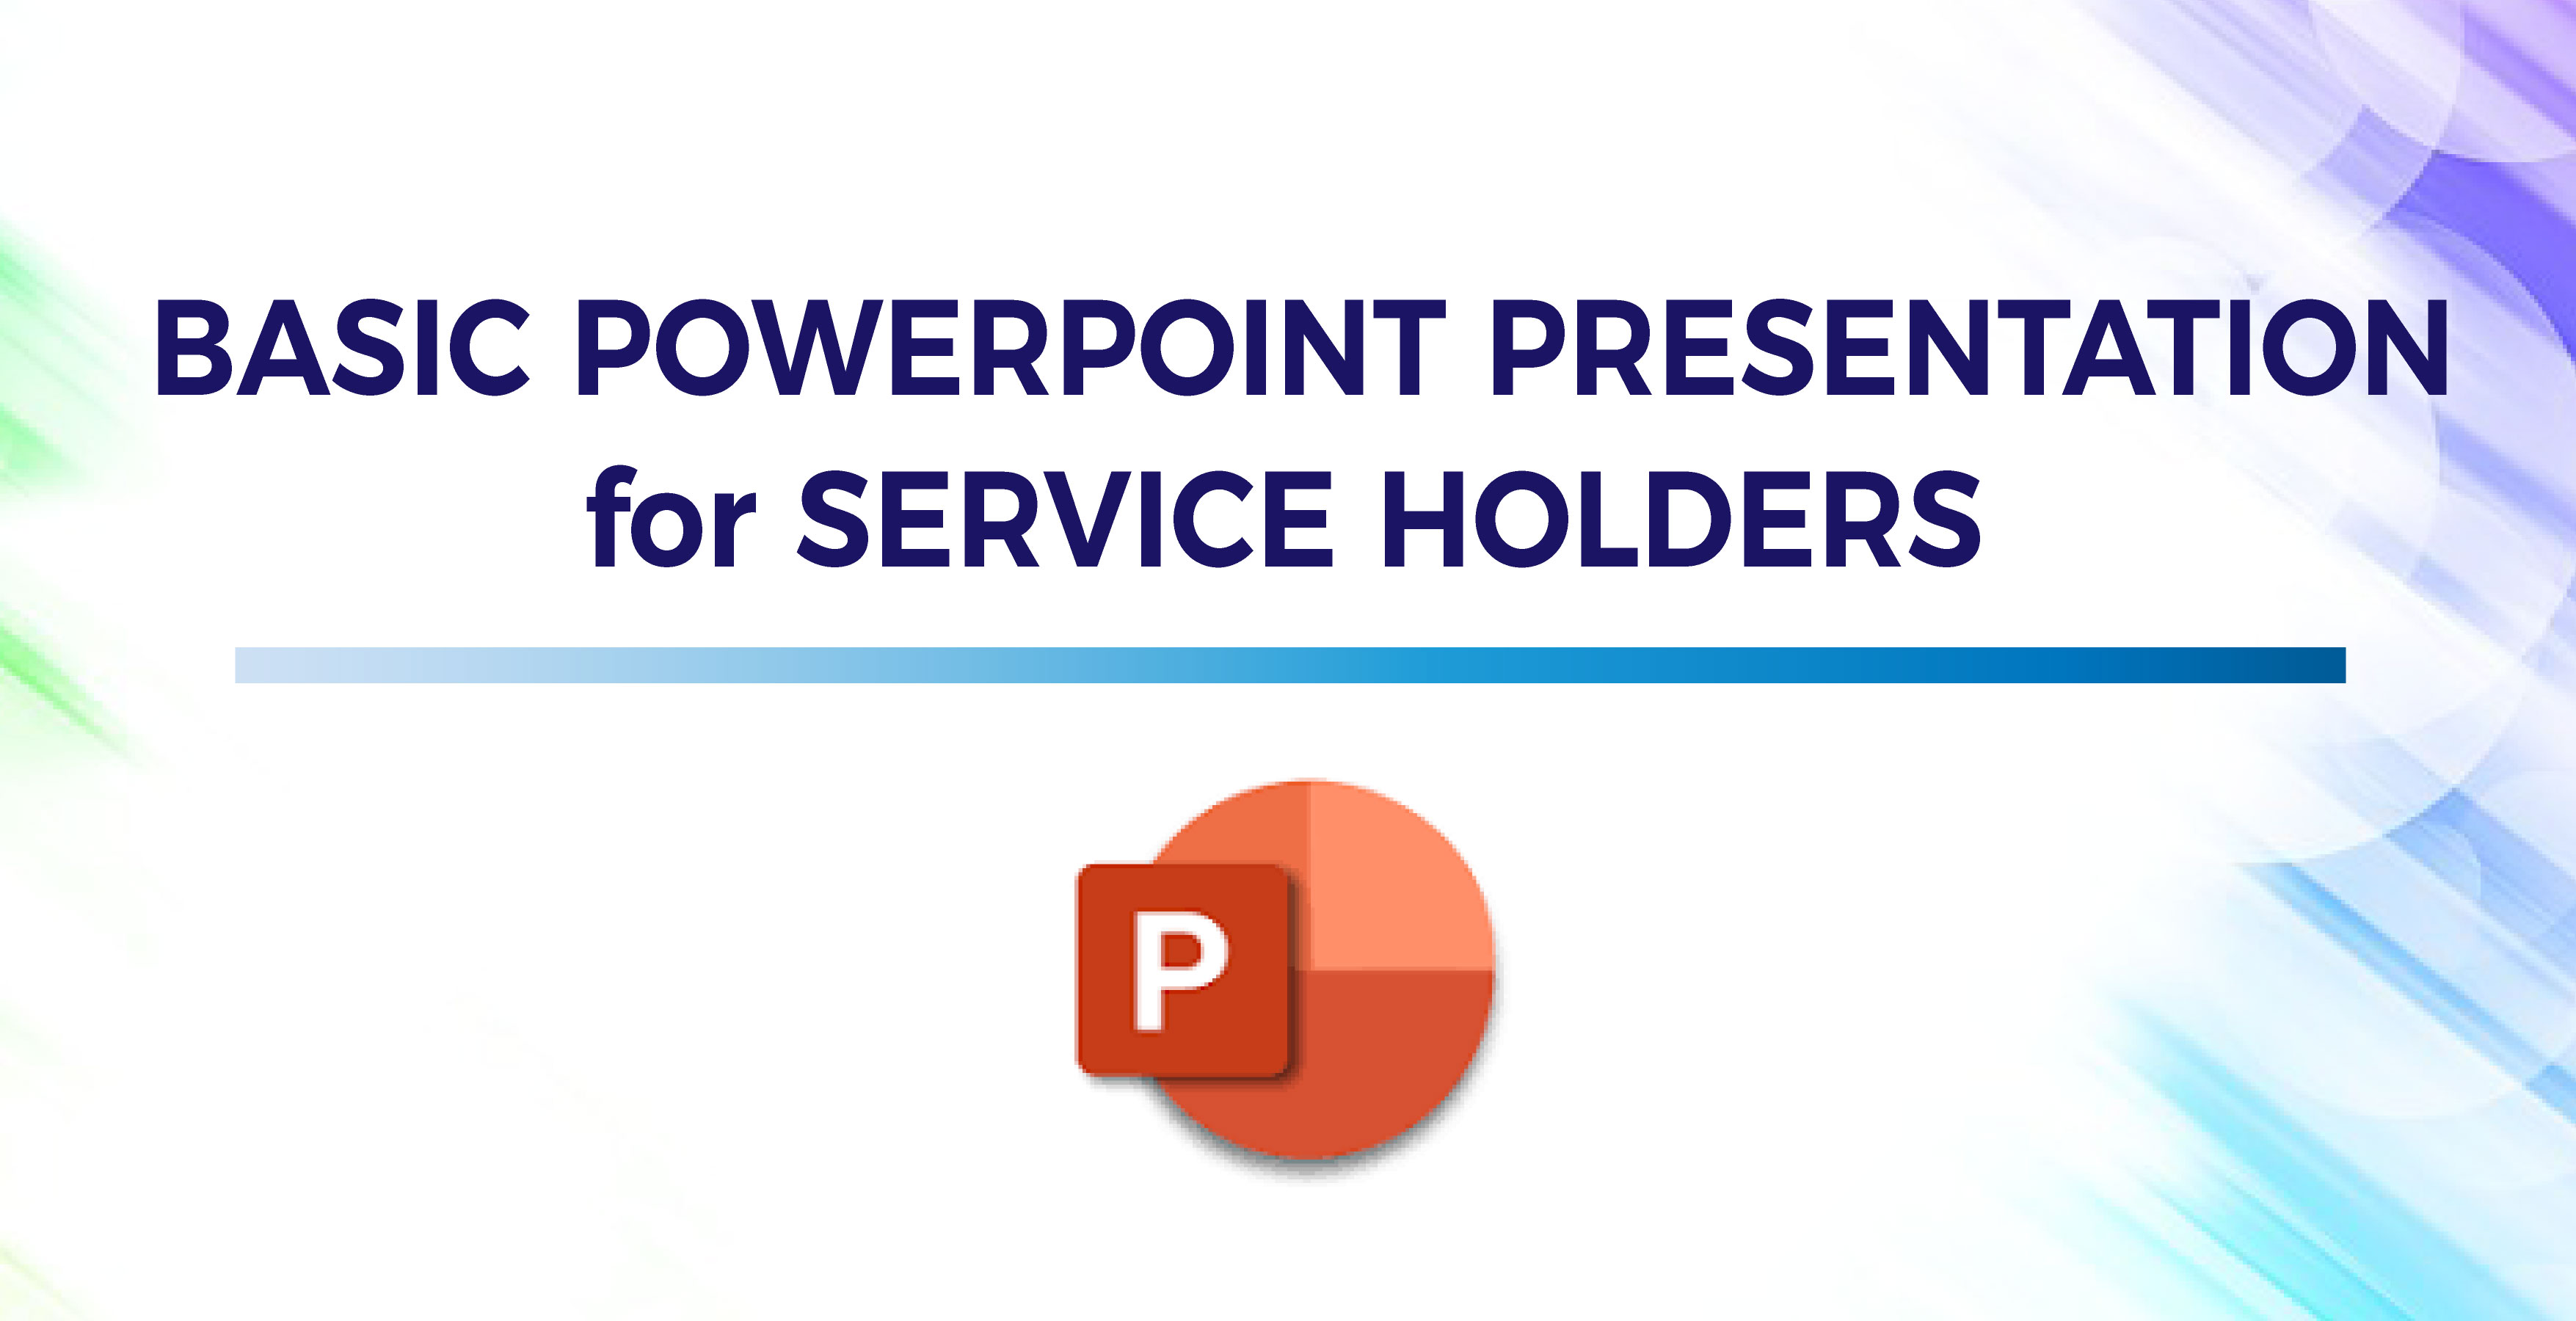 Basic Powerpoint Presentation for Service Holders